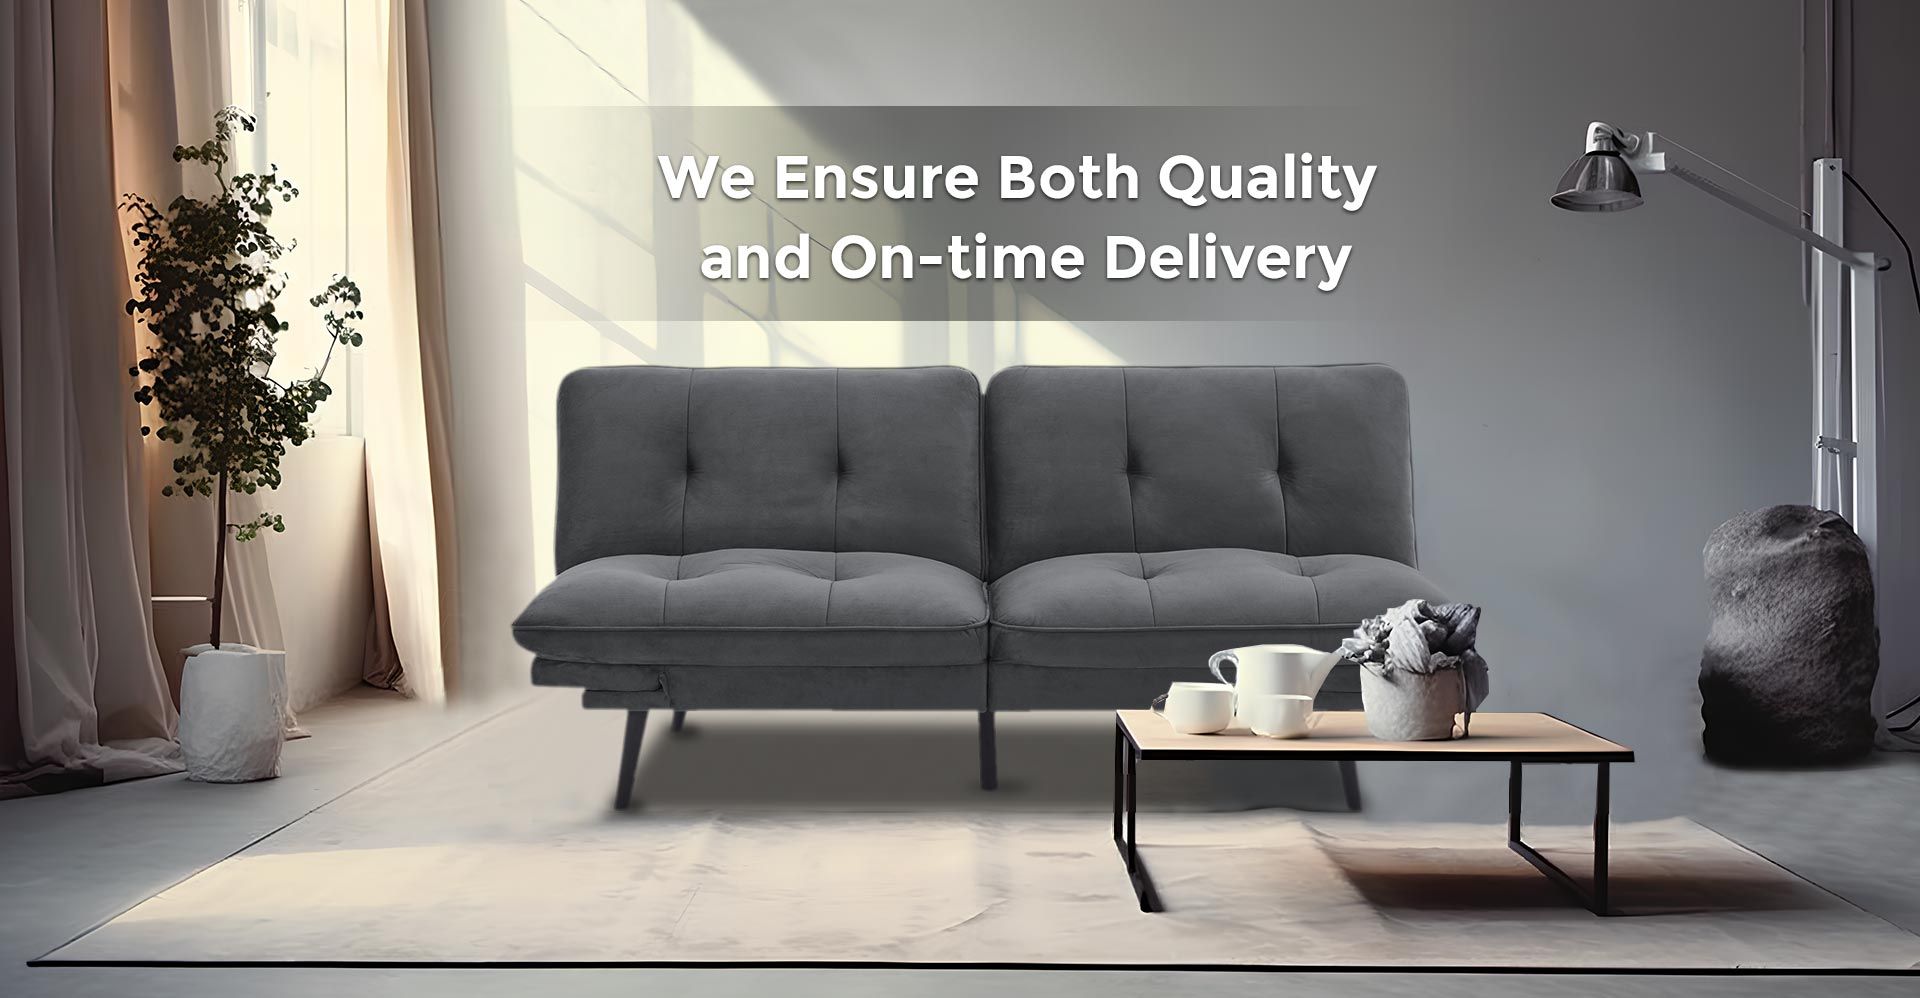 We ensure both quality and on-time delivery